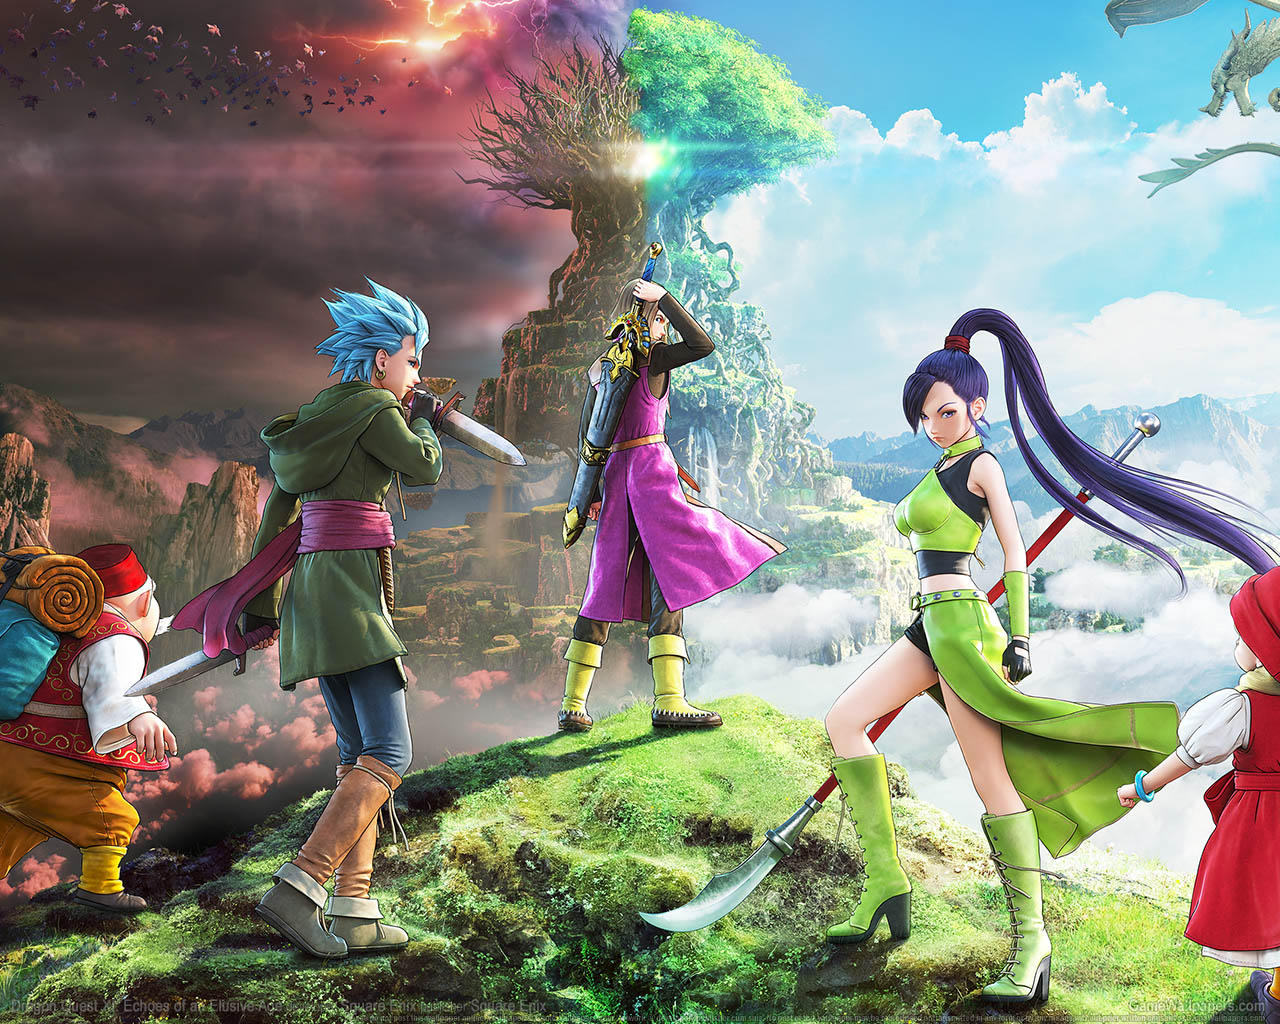 Dragon Quest XI: Echoes of an Elusive Ageνmmer=01 wallpaper  1280x1024